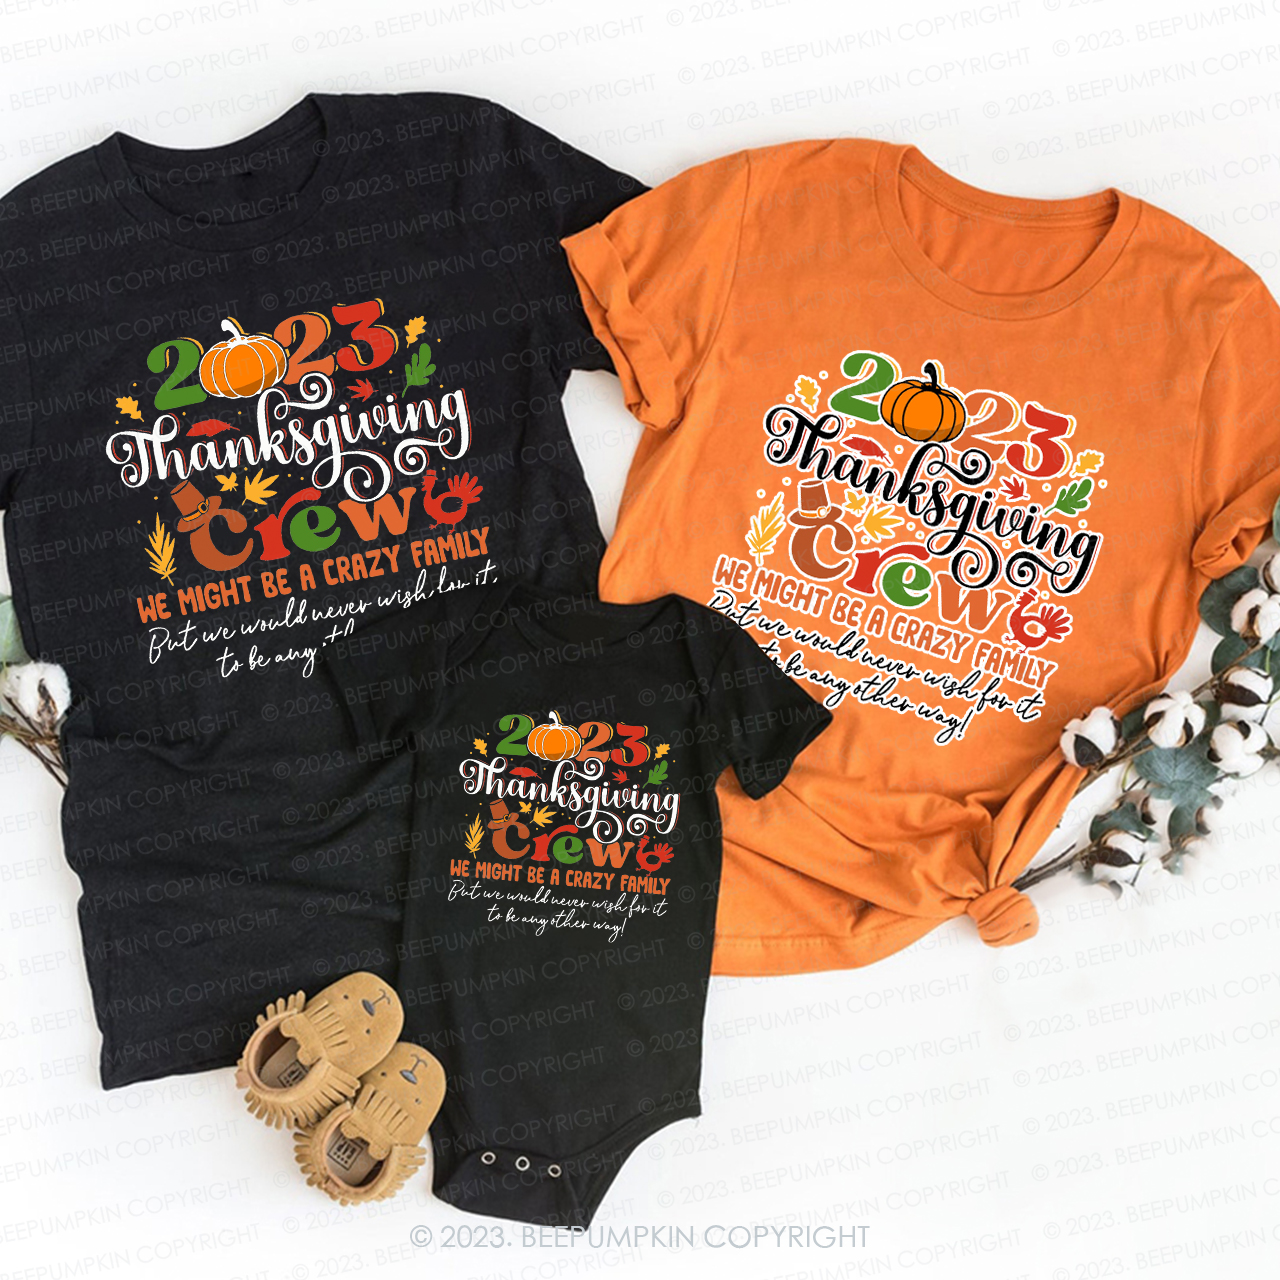 We Might Be A Crazy Family Thanksgiving Crew T-shirts Beepumpkin